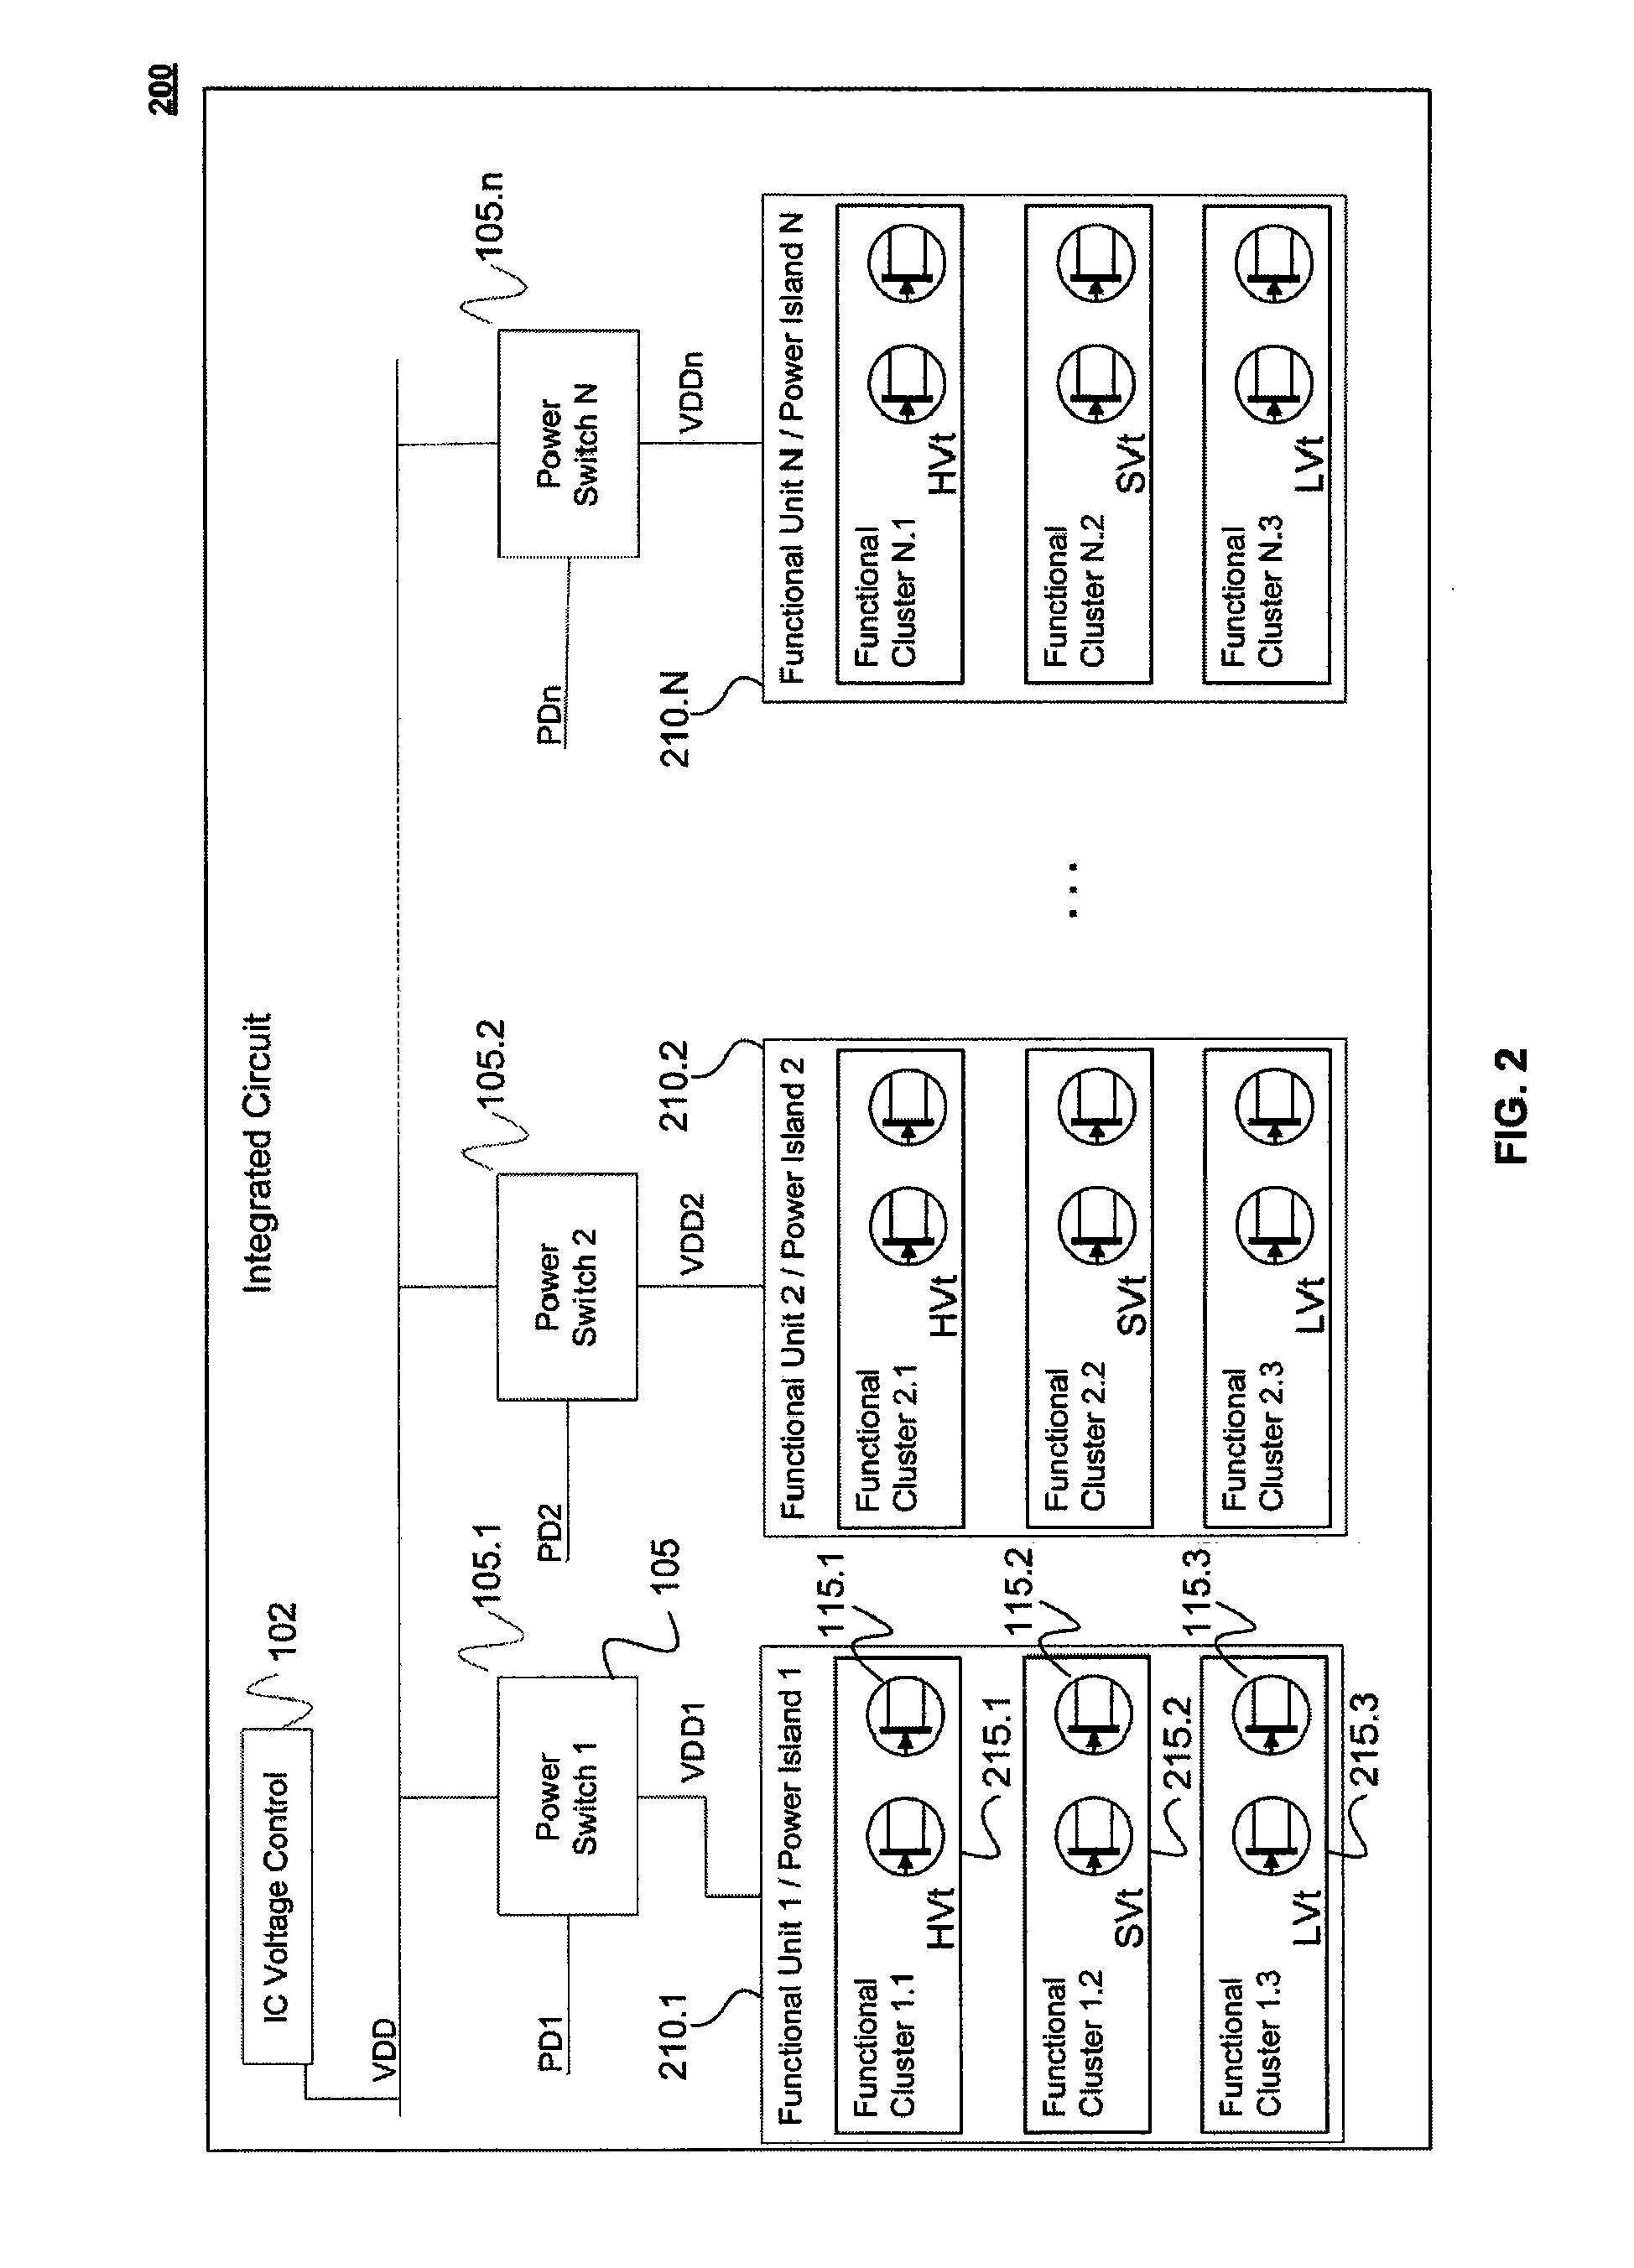 Integrated Circuit with Modular Dynamic Power Optimization Architecture